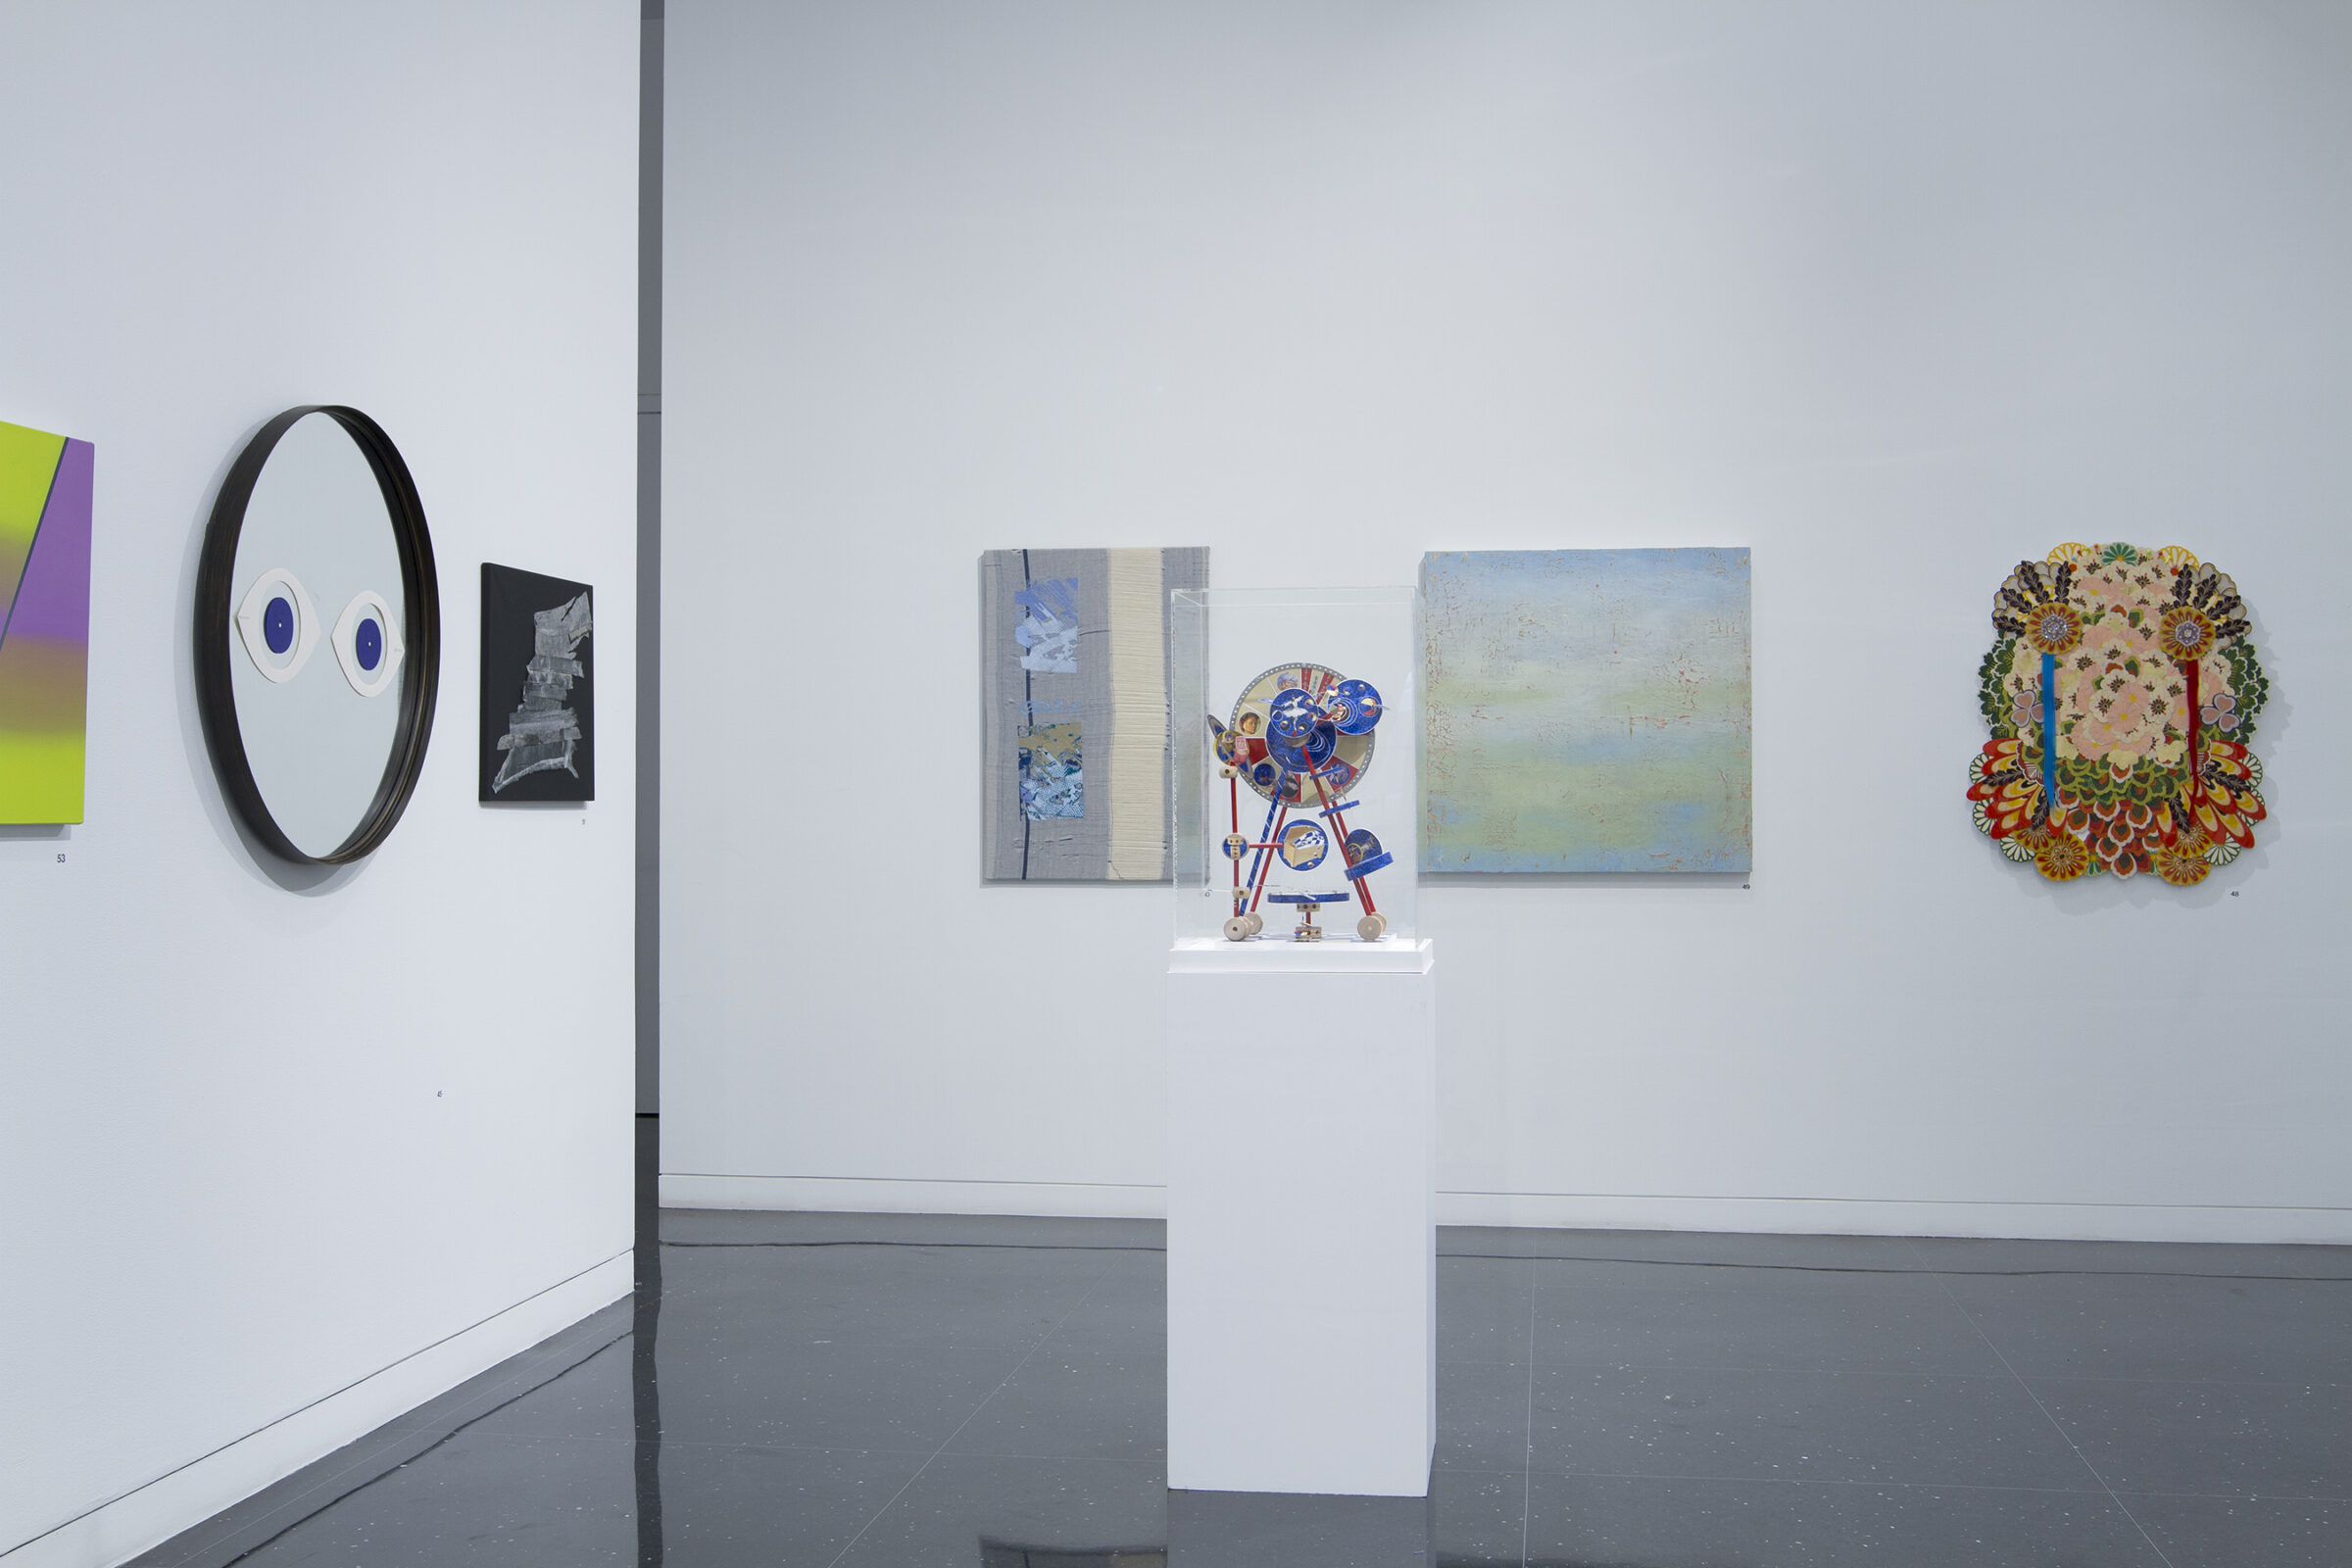 A white walled gallery space in which several paintings and framed artworks are aligned horizontally on the walls and a small, colorful, carnivalesque sculpture stands on a white pedestal